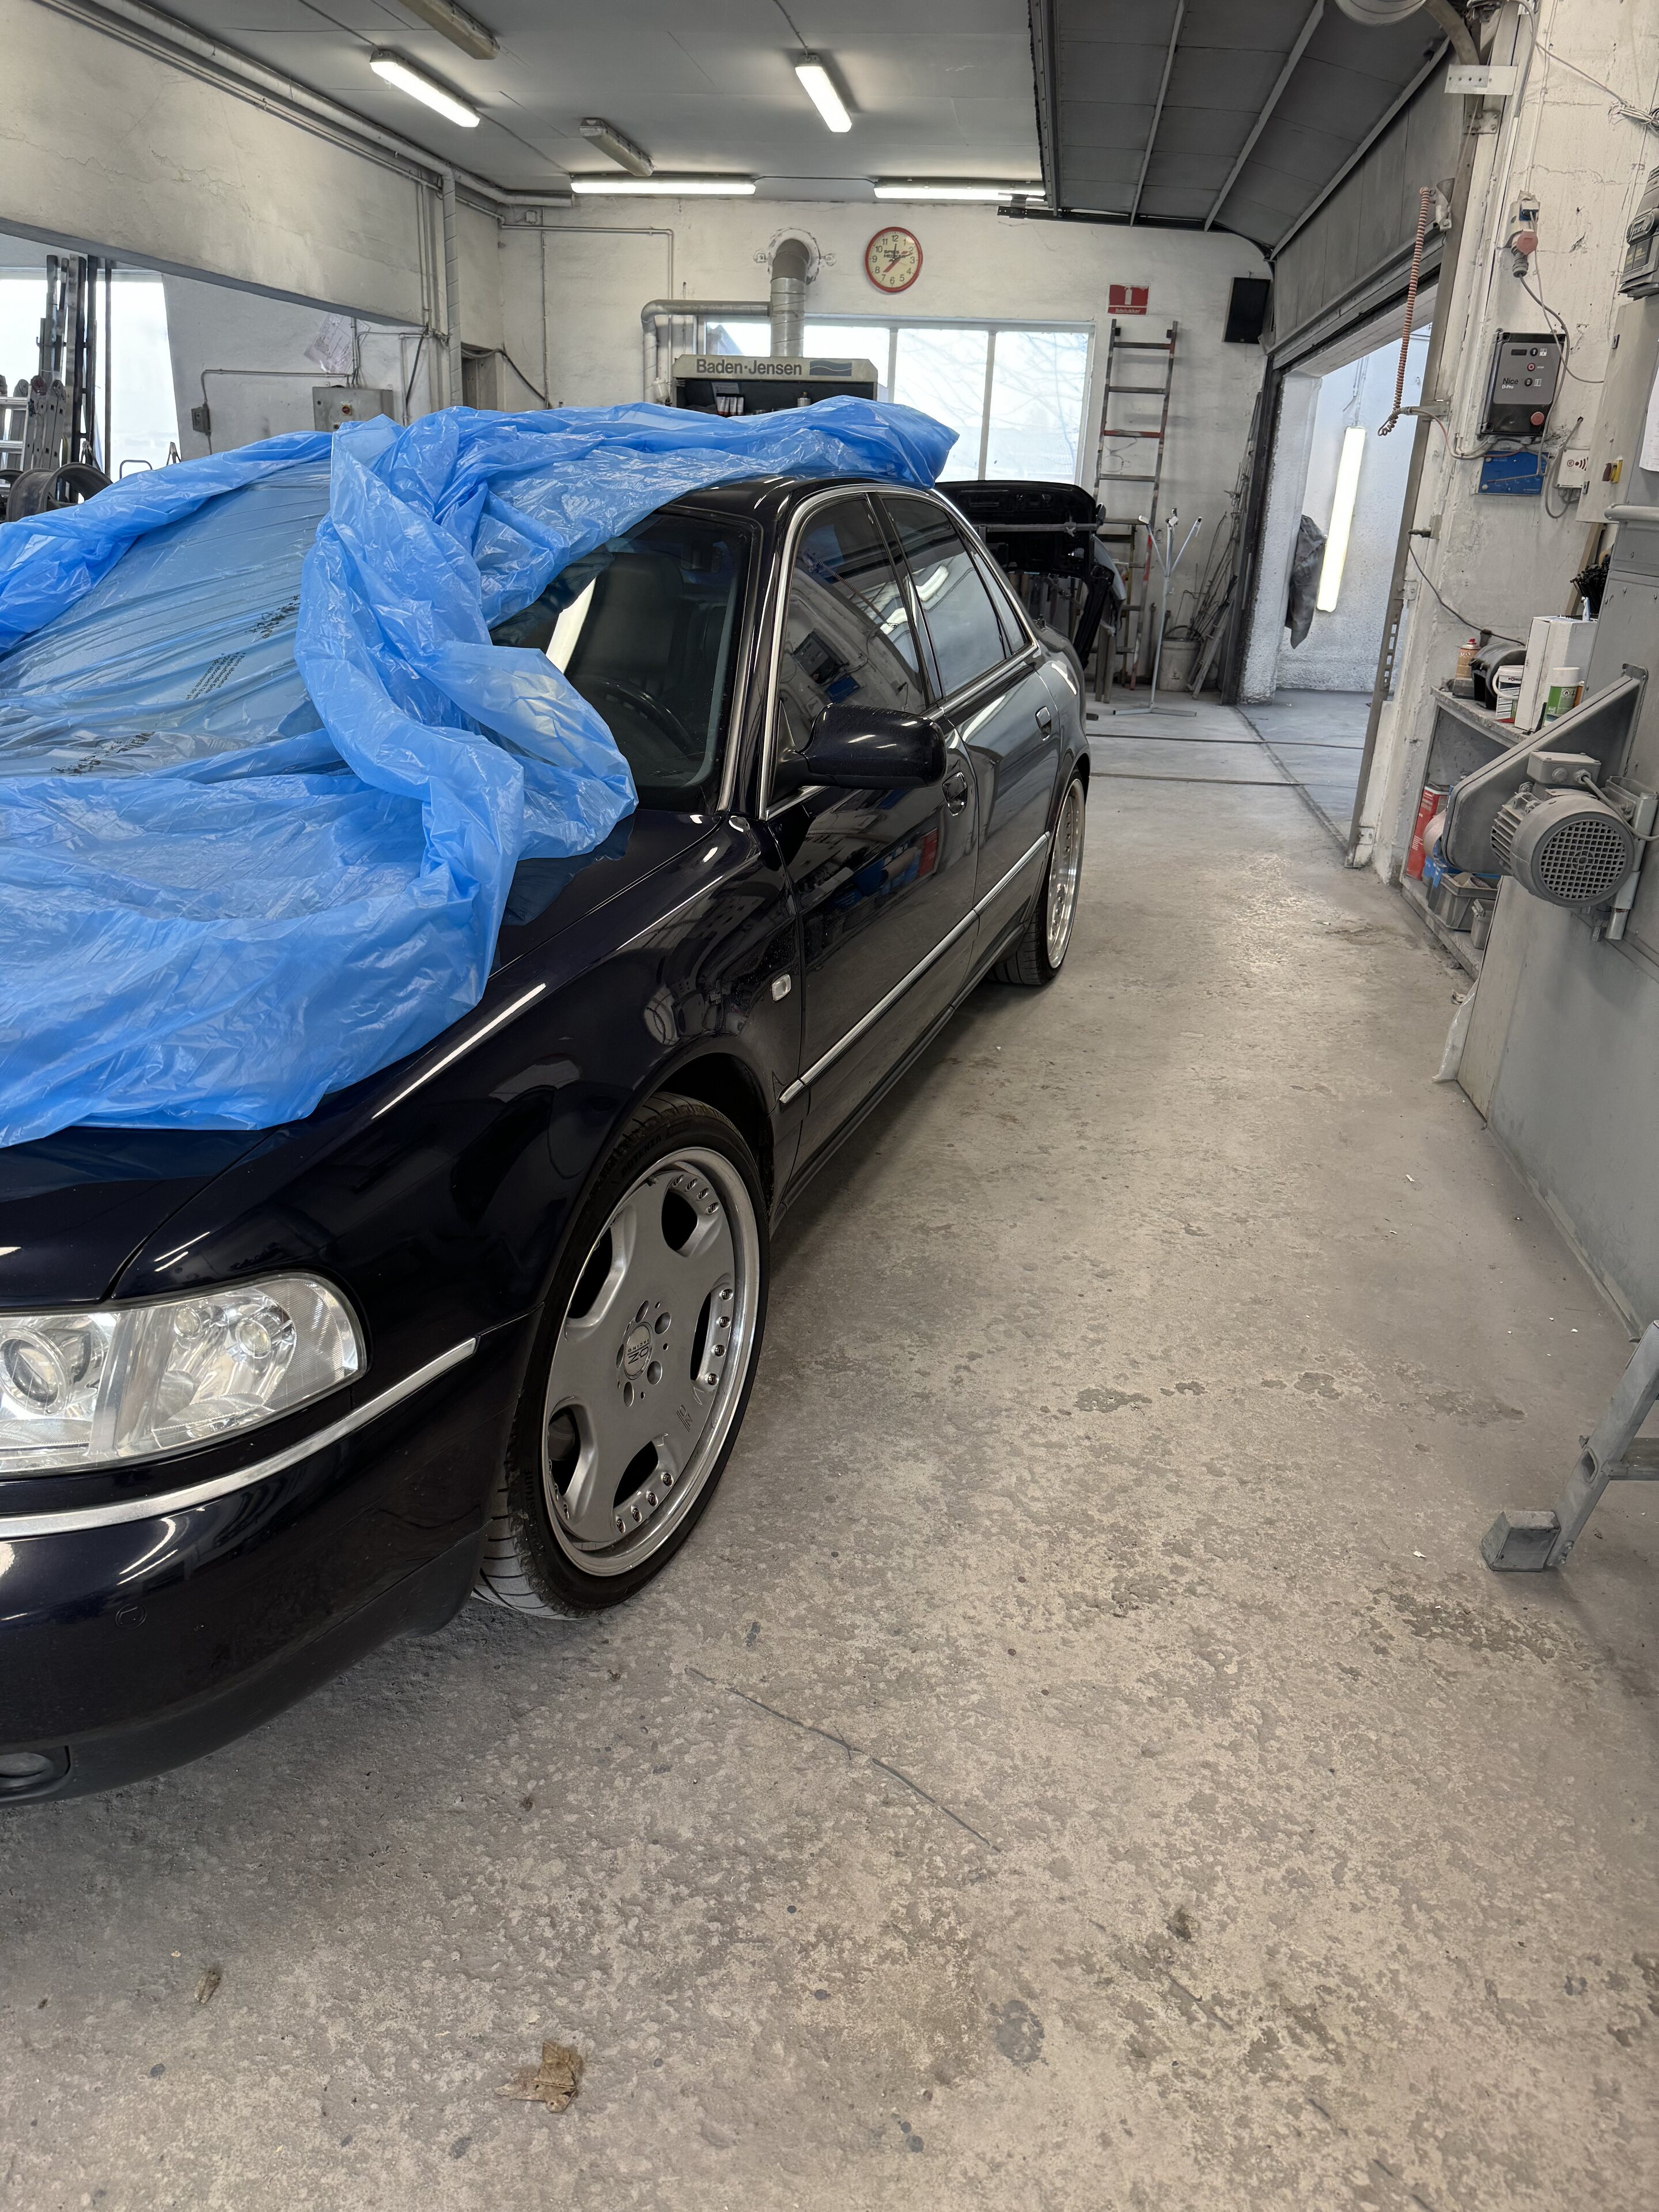 What’s in the paint shop today? - Page 4 - Bodywork & Detailing - PistonHeads UK